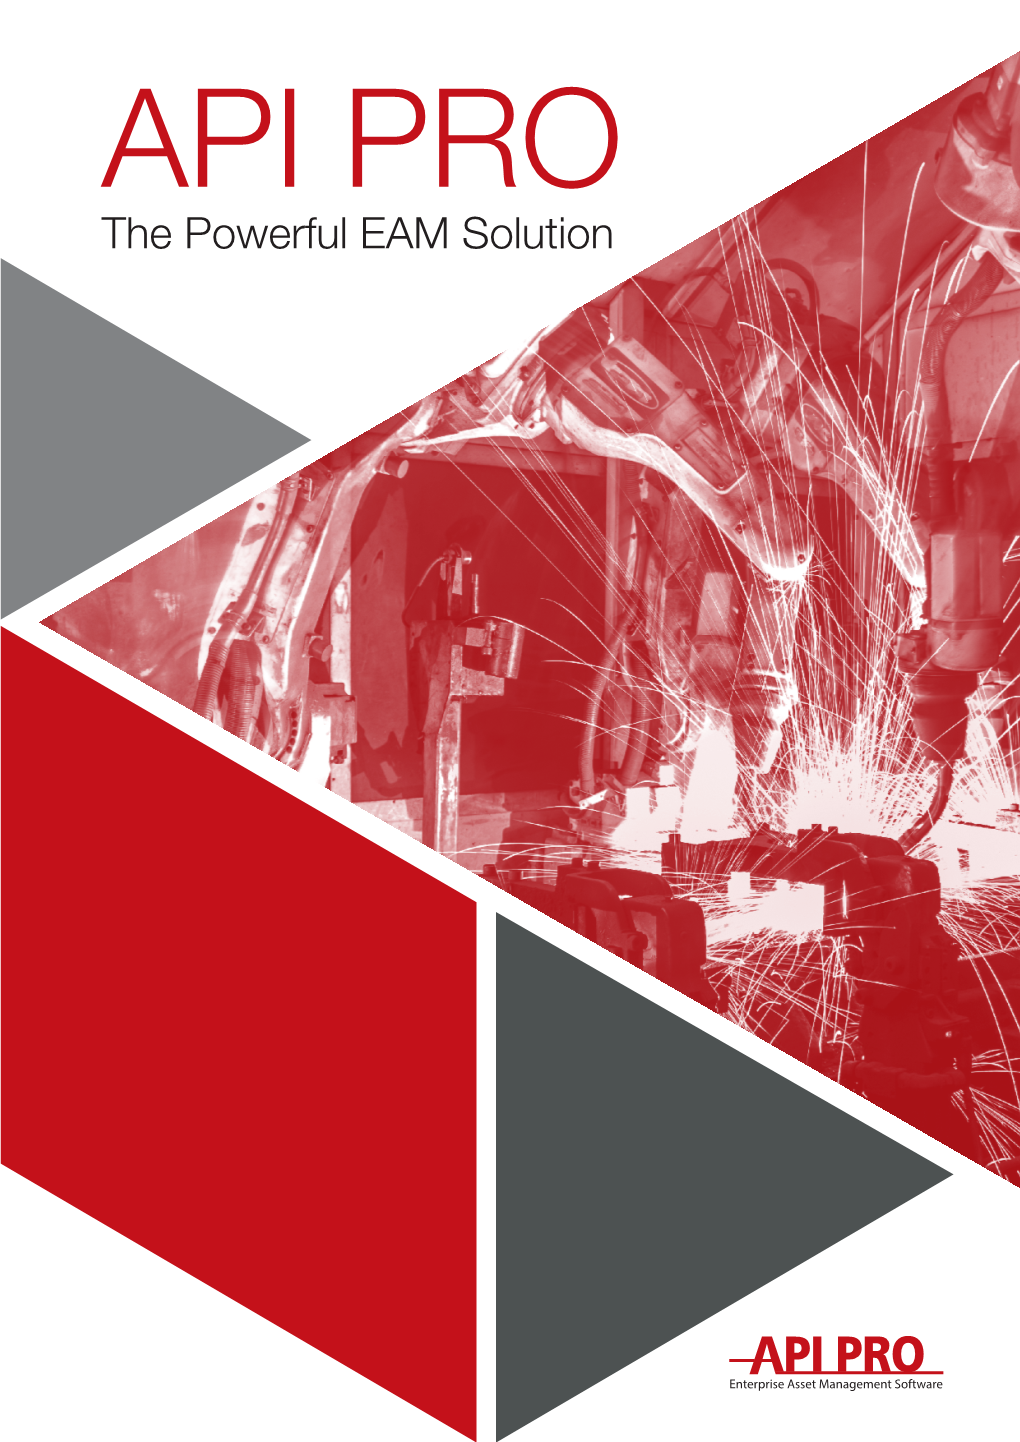 The Powerful EAM Solution